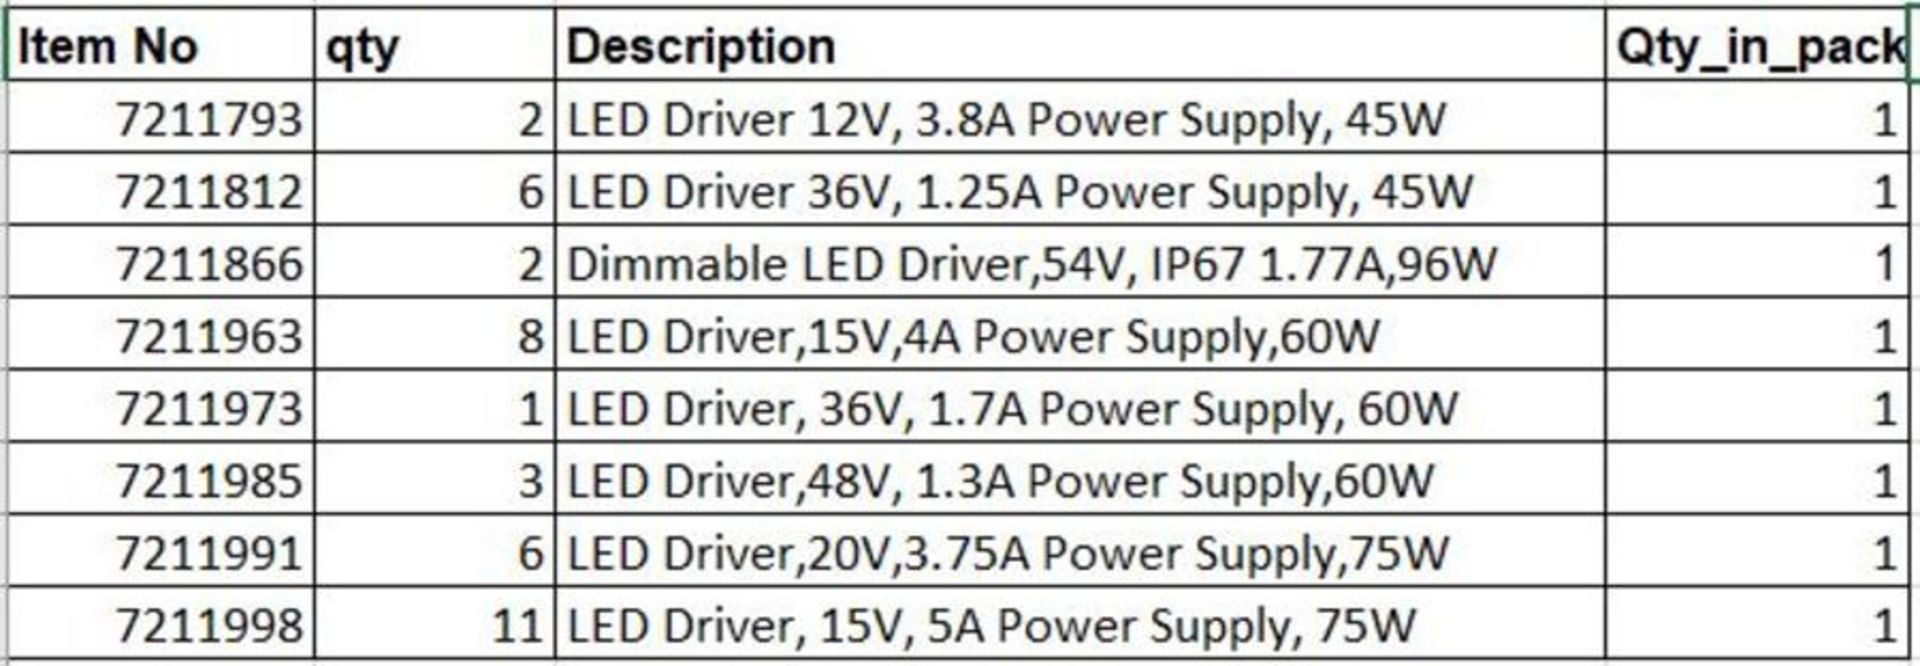 39 Various Constant Current LED Drivers - 8 different items - Image 3 of 6